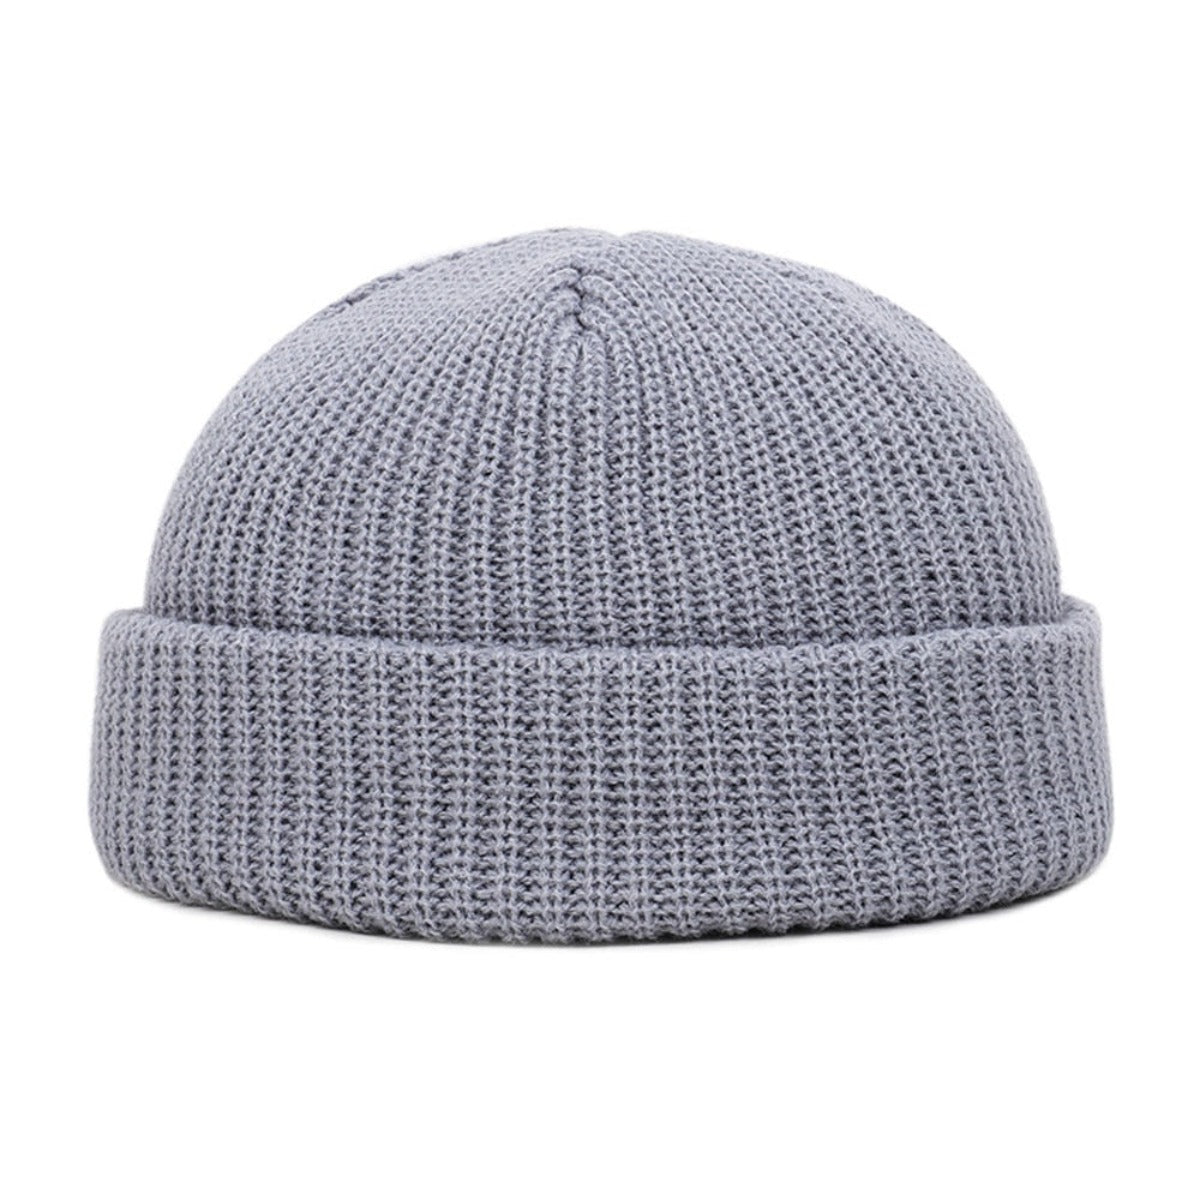 A Wool Knitted Skull Cap Beanie, made of grey knit fabric, on a white background.